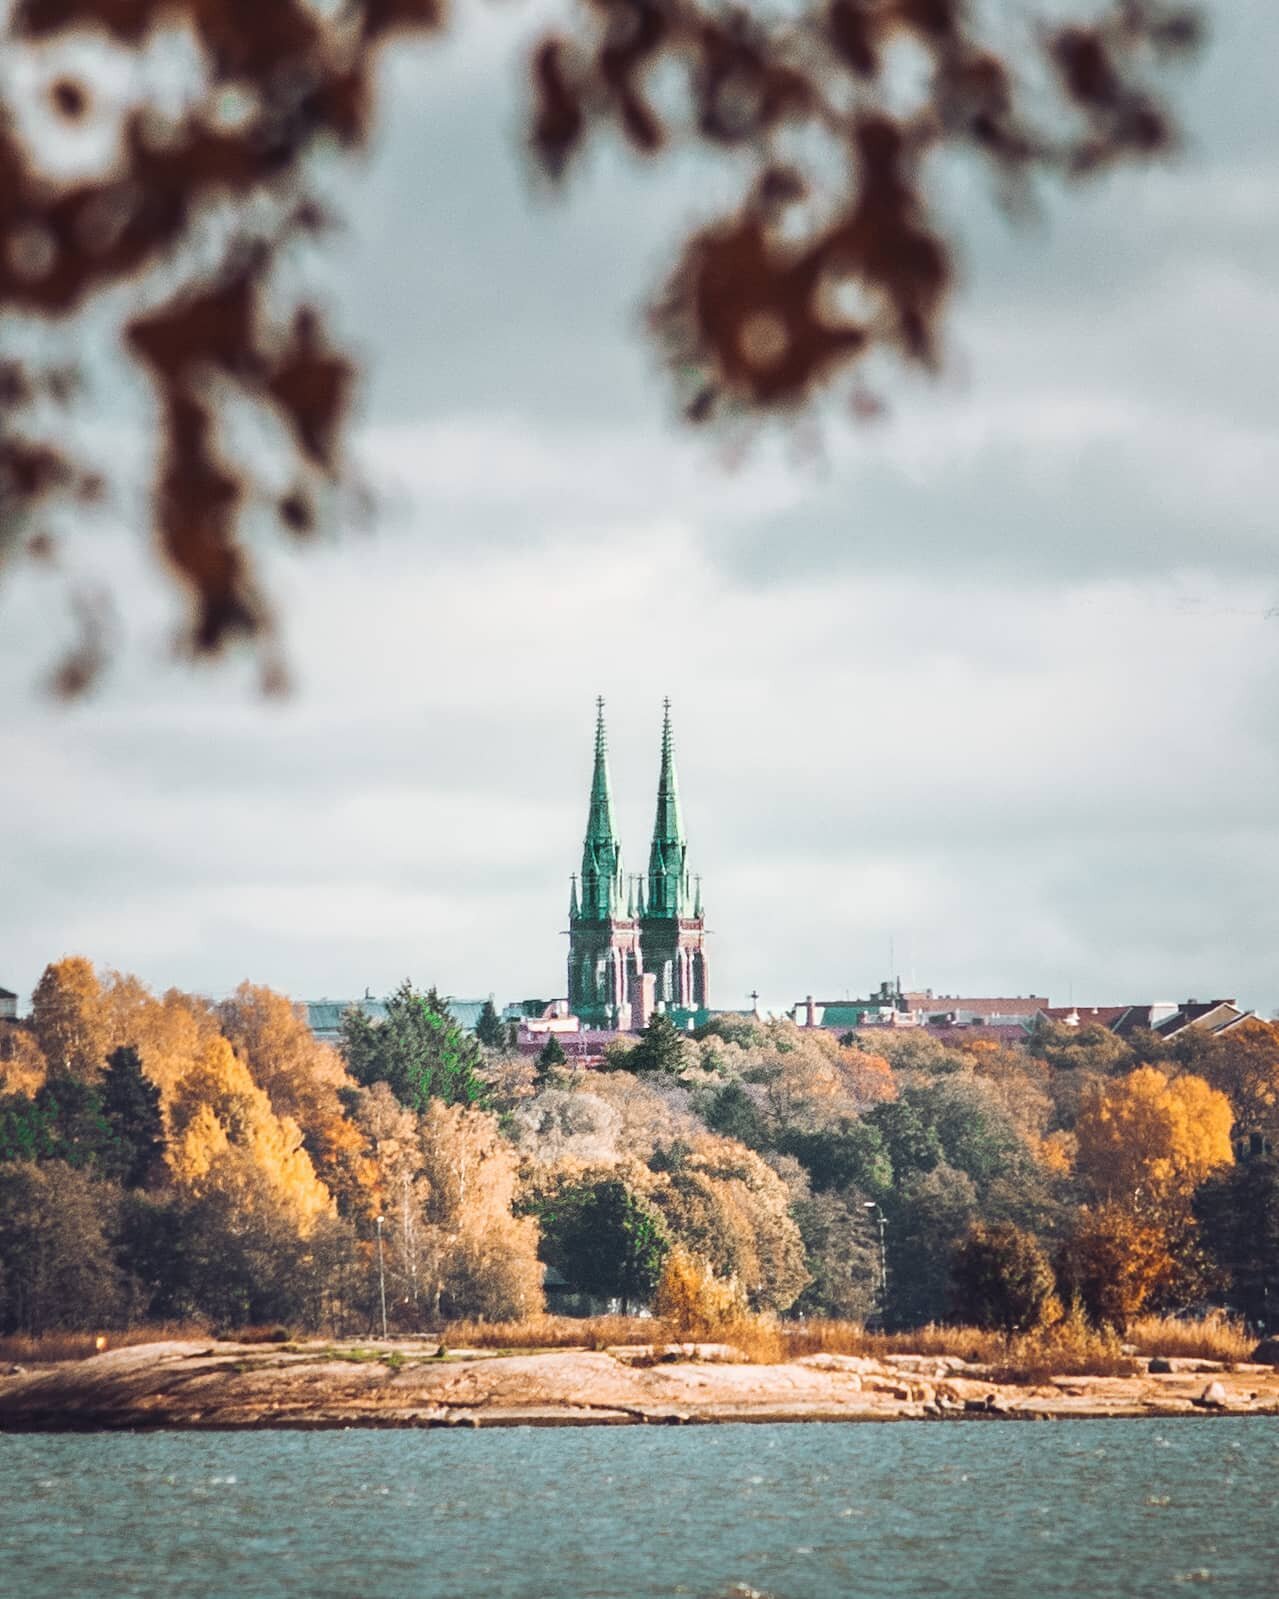 St. John's Curch from a quite unusual angle ⛪

_______________

#stjohnschurch #helsinki #church ##thebestoffinland #ourfinland #ig_finland #finland_frames #visitfinland #suomi #discoverfinland #finland #finnishnature #outdoorfinland #ig_landscape #n